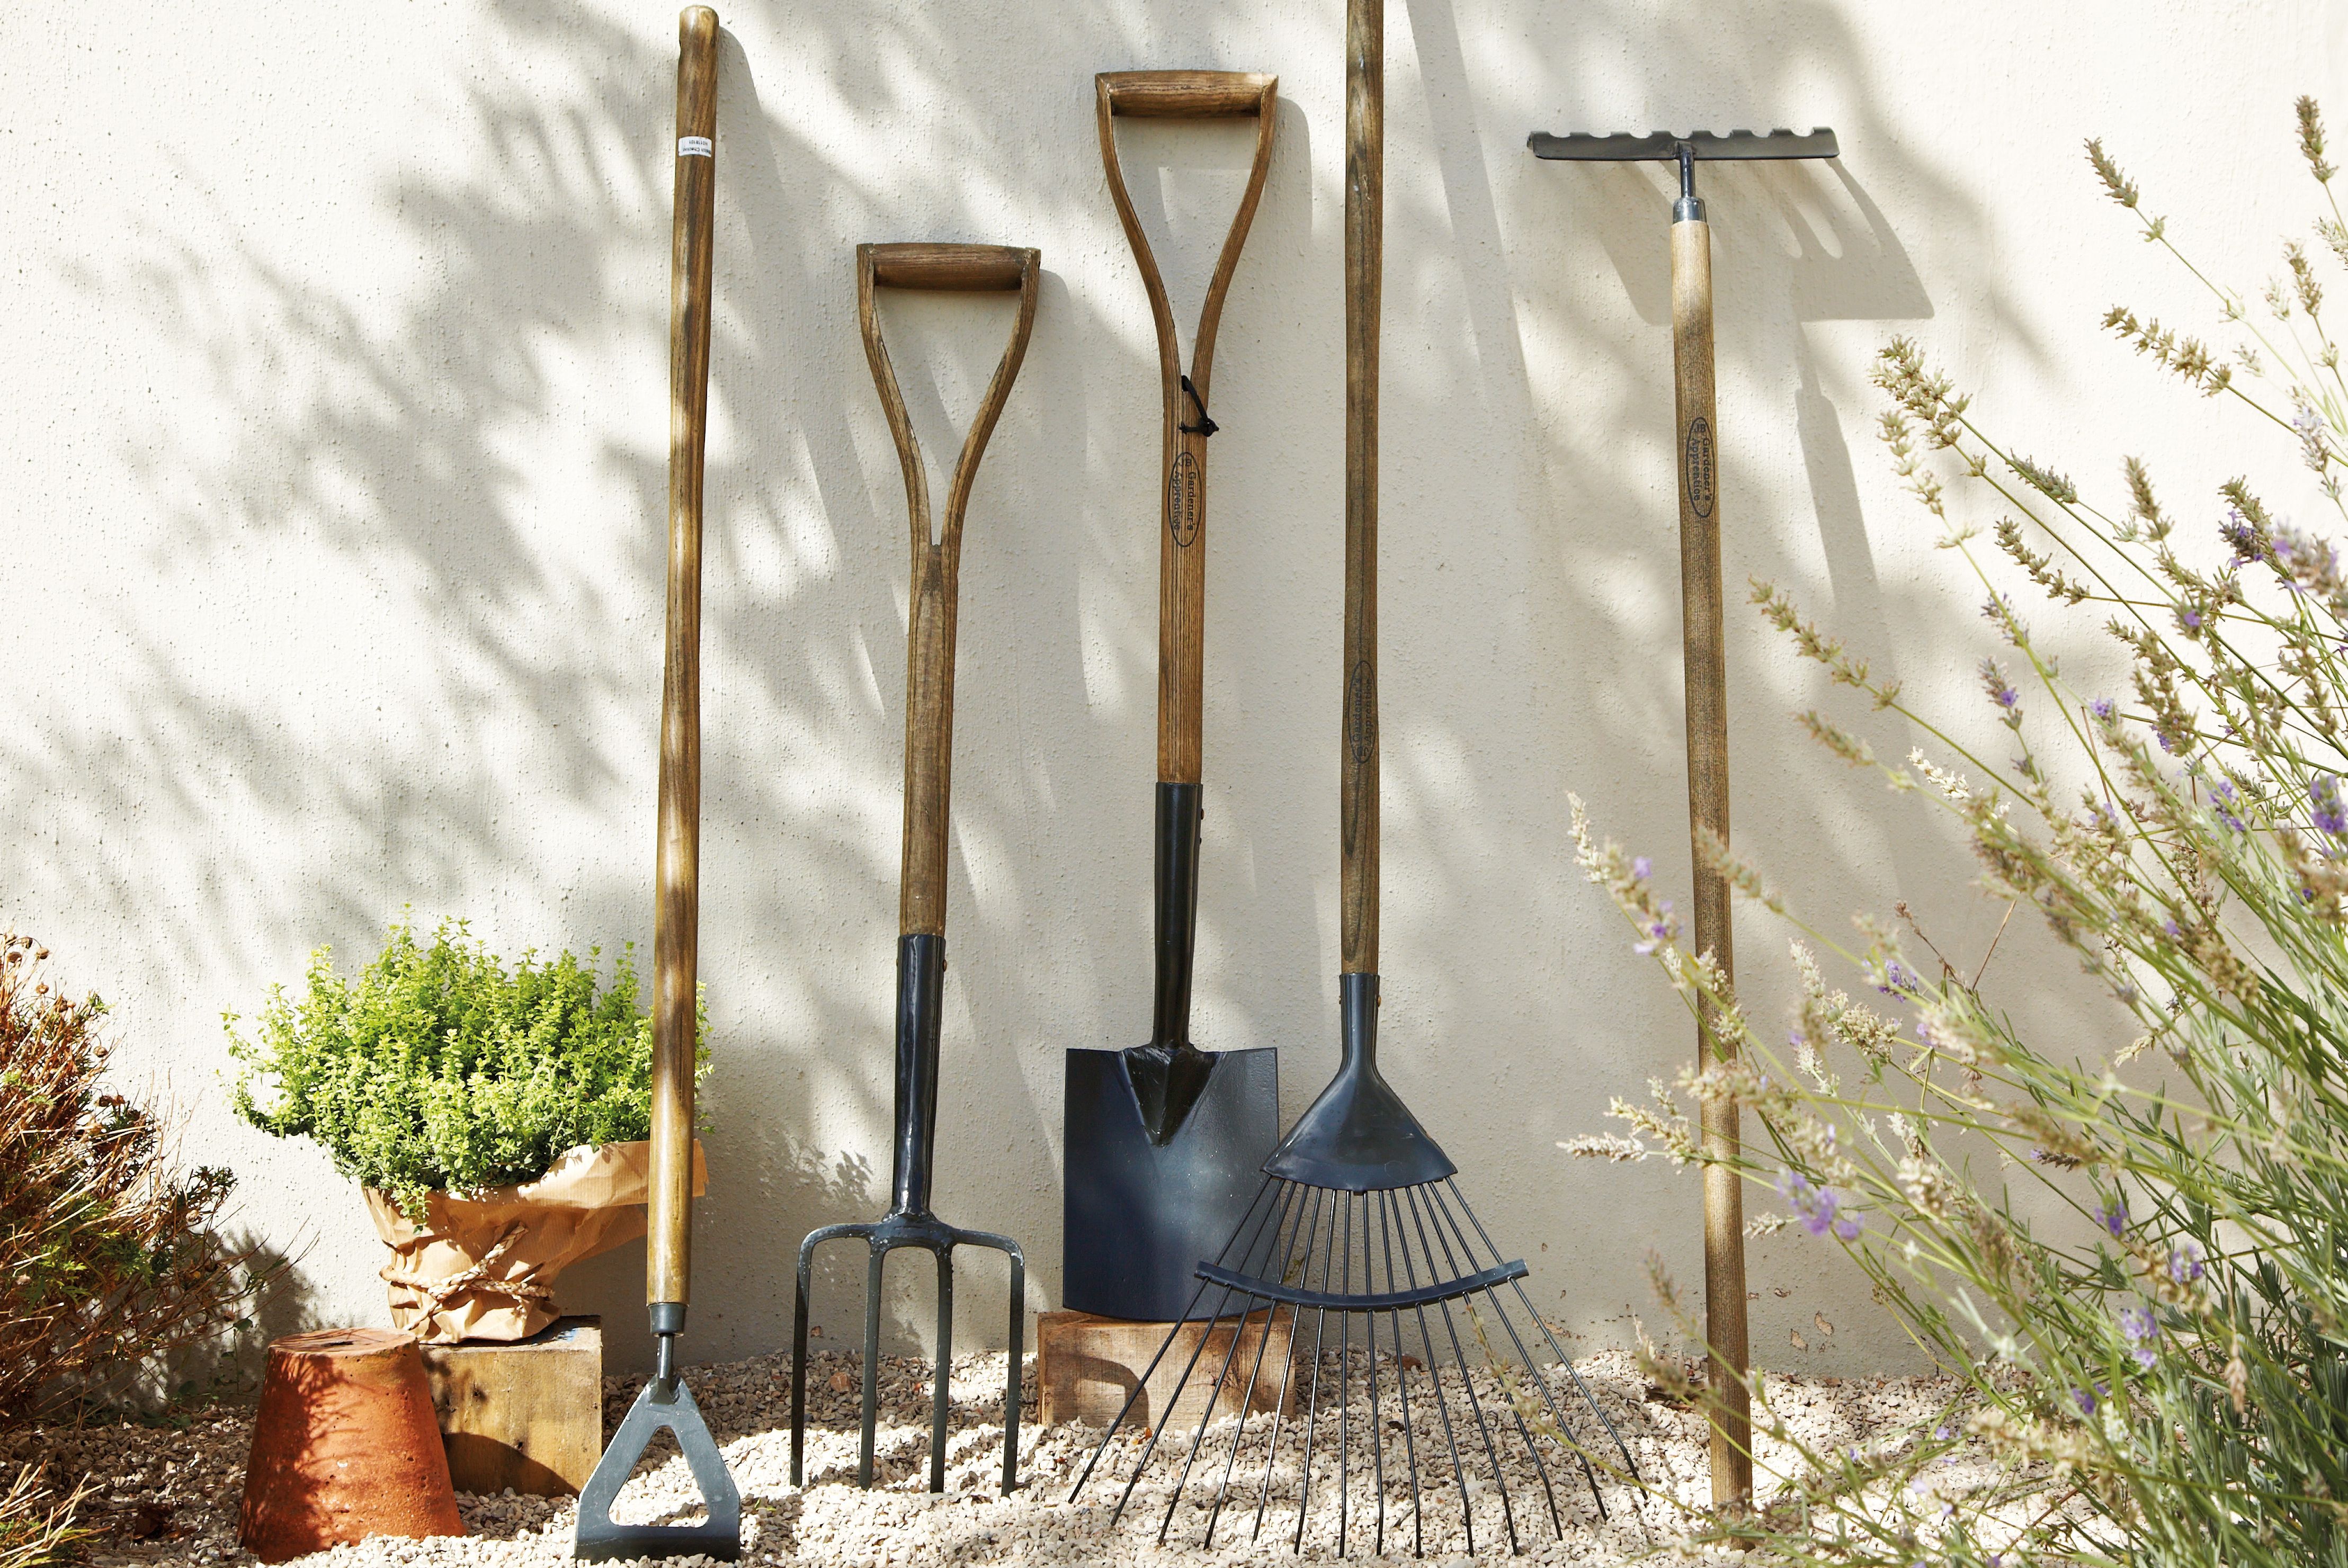 Building And Landscaping Tools Buying Guide Ideas And Advice Diy At Bandq